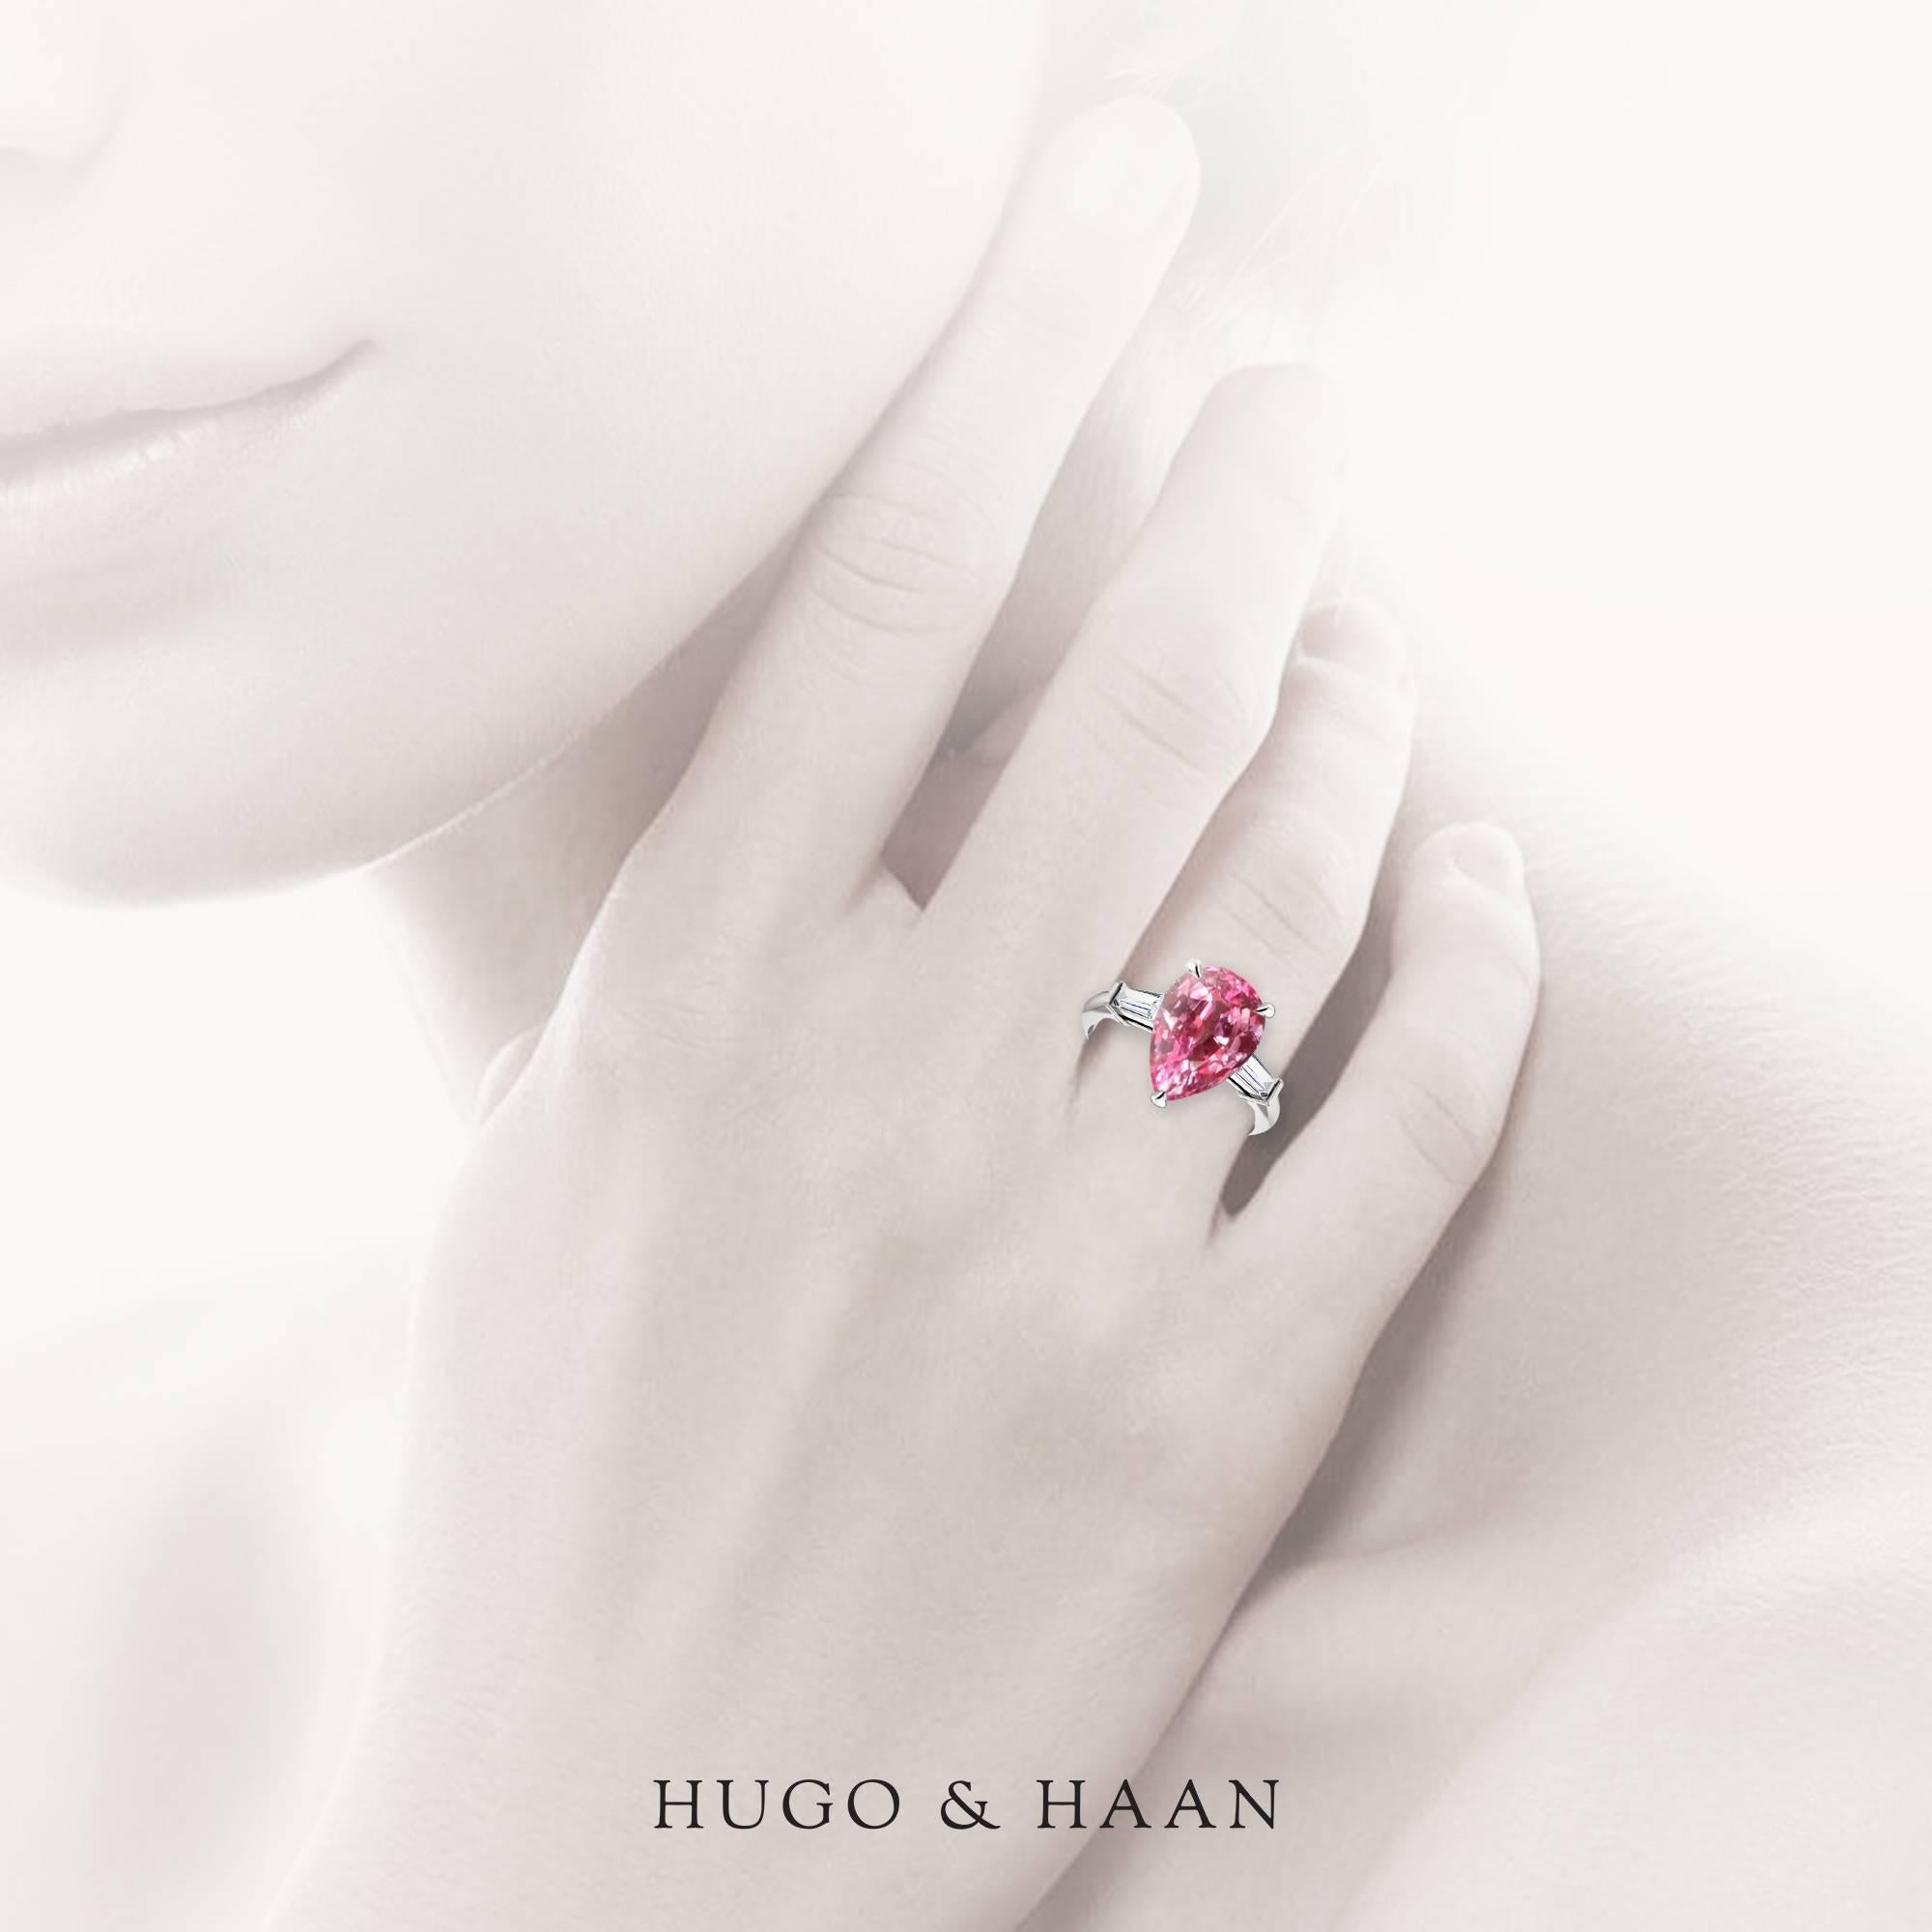 Hugo & Haan White Gold Pear Cut Pink Tourmaline Tapered Diamond Cocktail Ring In New Condition For Sale In London, GB